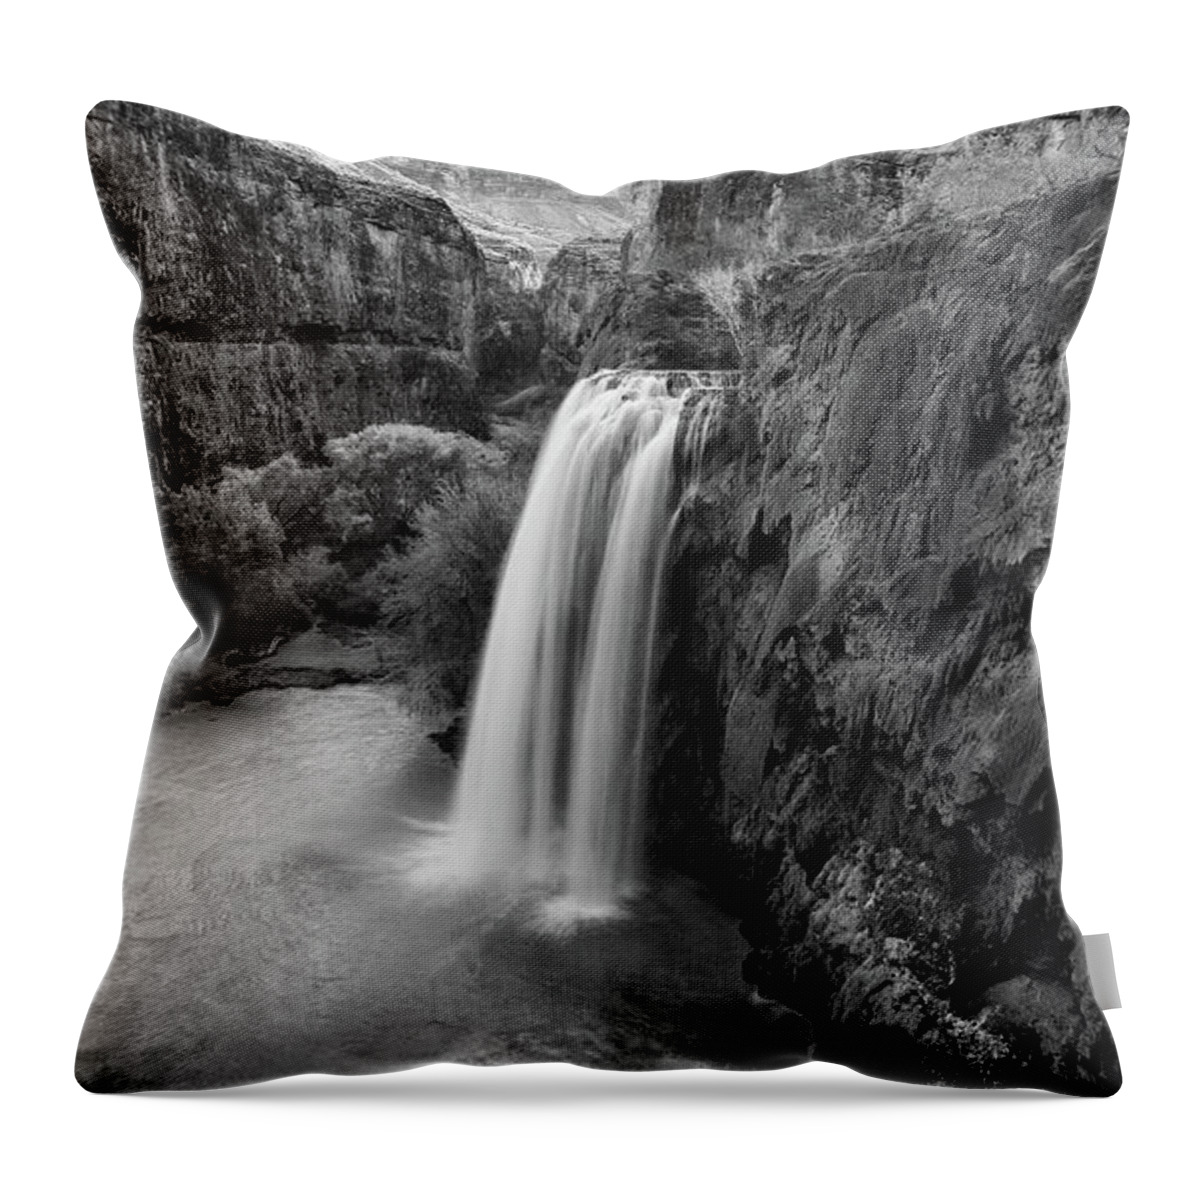 Water Photography Throw Pillow featuring the photograph Havasu Falls by Keith Kapple